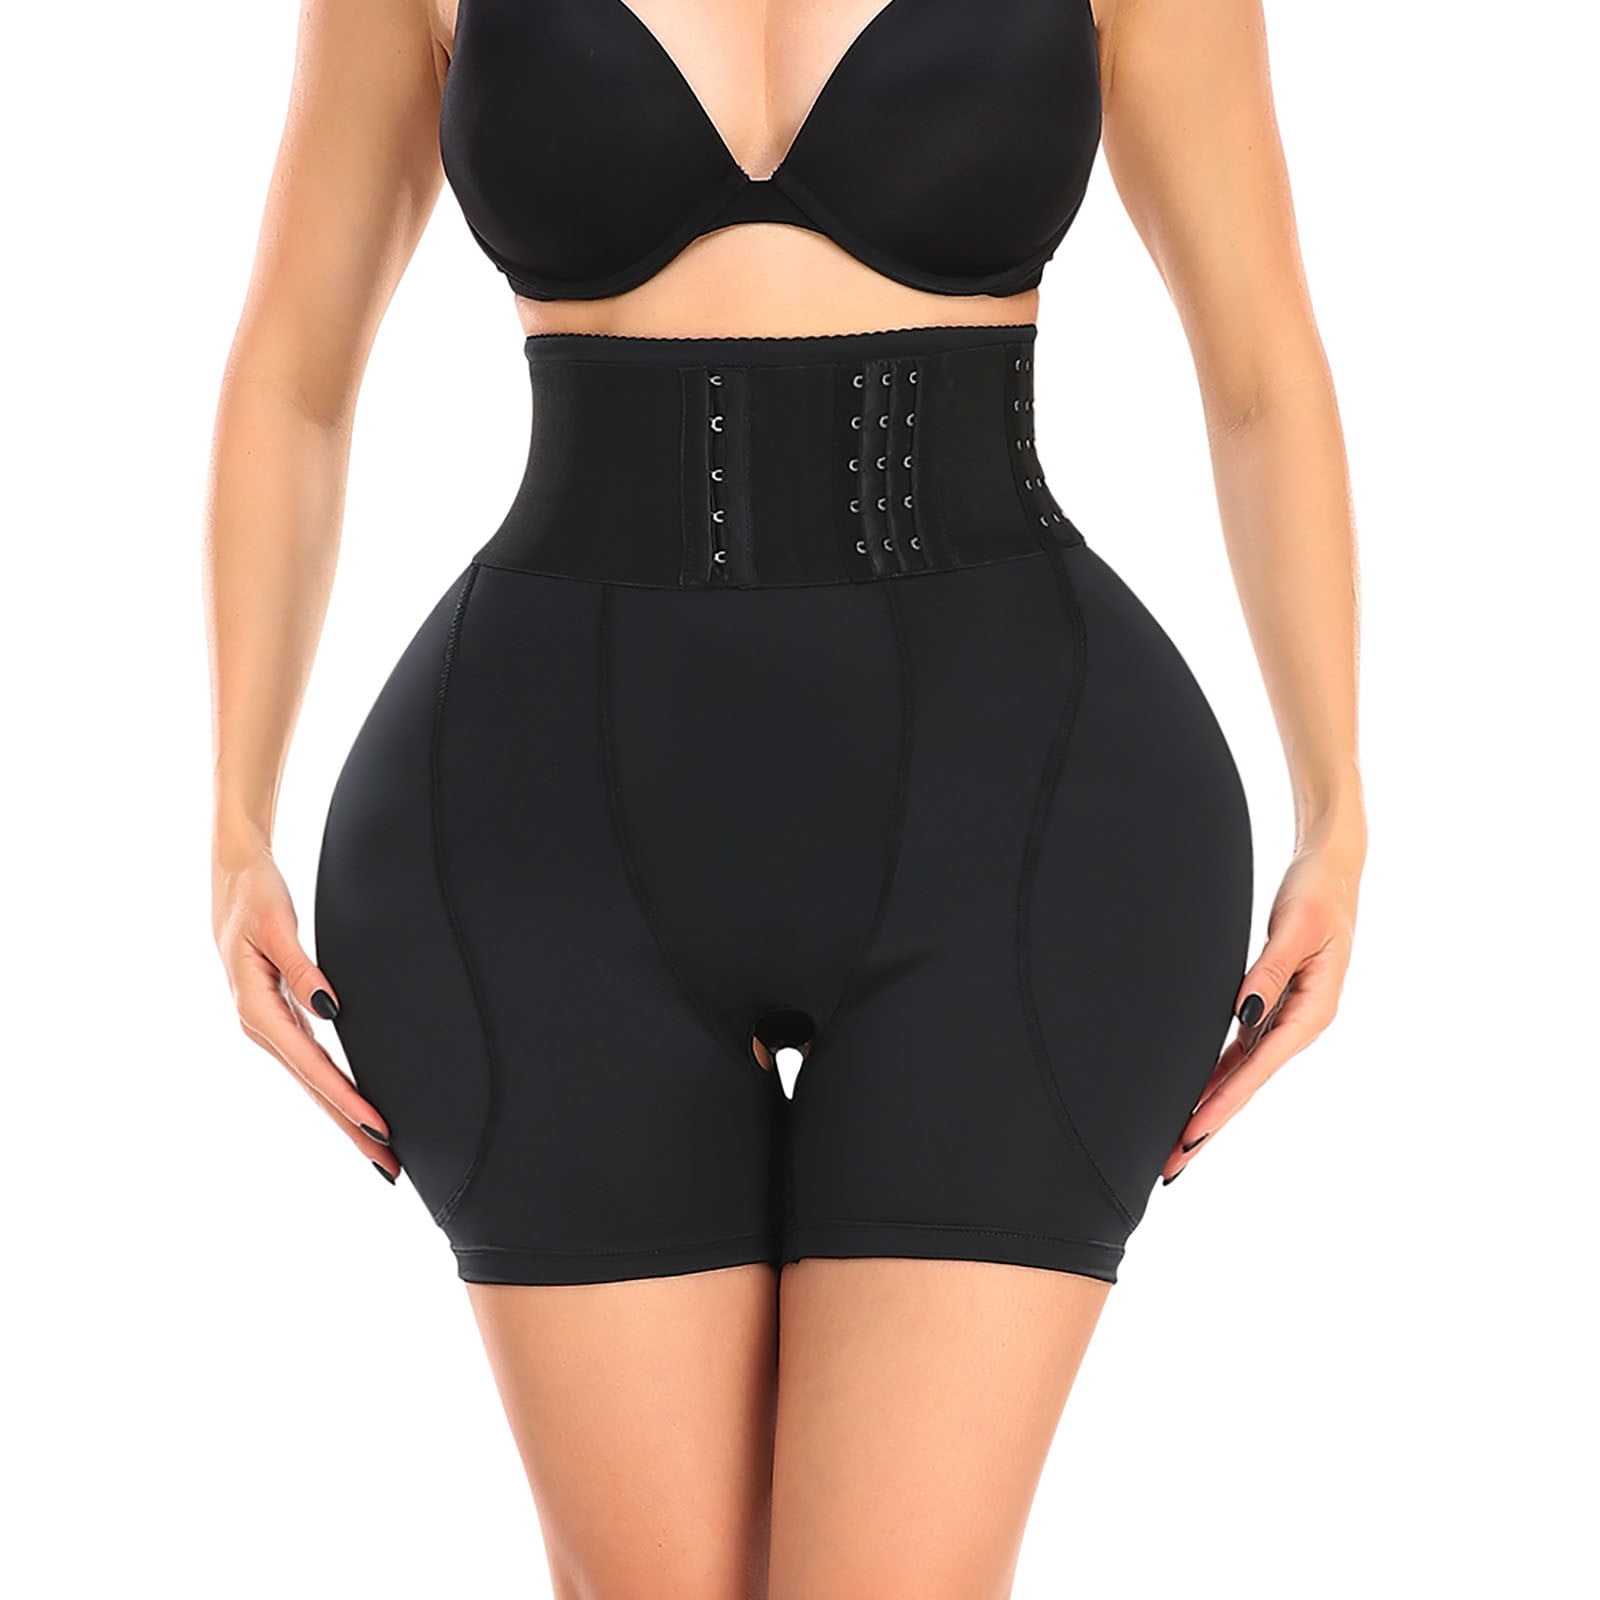 S-6xl Panty Girdle For Women High Waist Trainer Body Shaper Hip Butt Pads  Thigh Trimmer Shapewear Waste Tummy Control